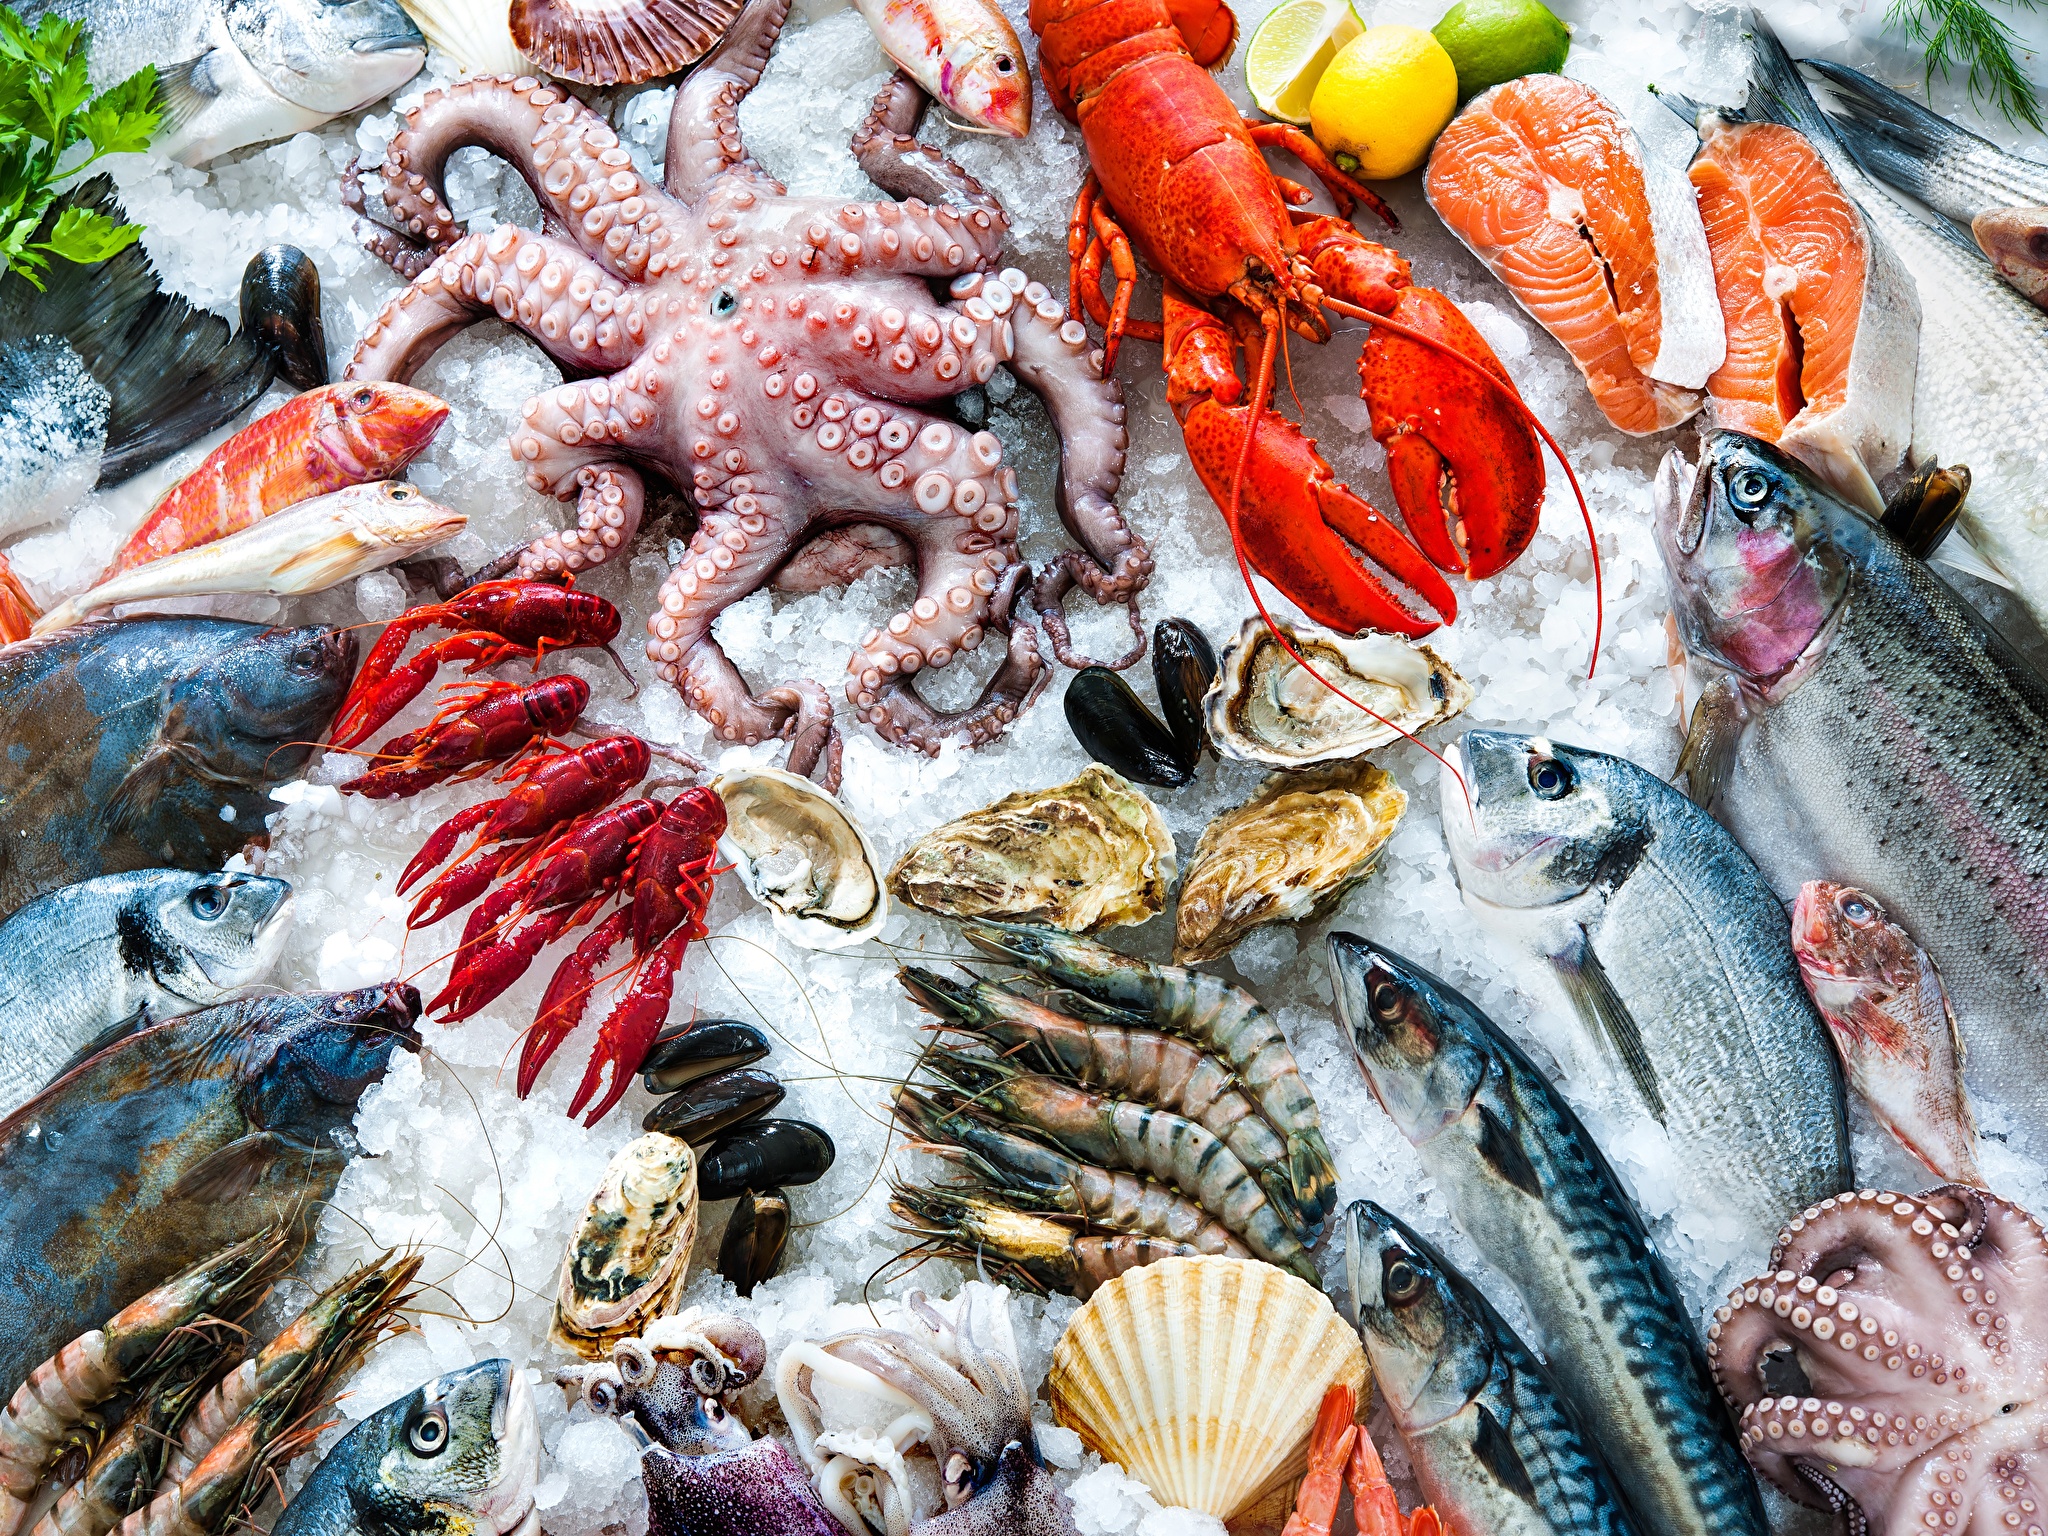 Euro Industry and Zolotaya Set are first time to participate in SEAFOOD EXPO RUSSIA 2021.